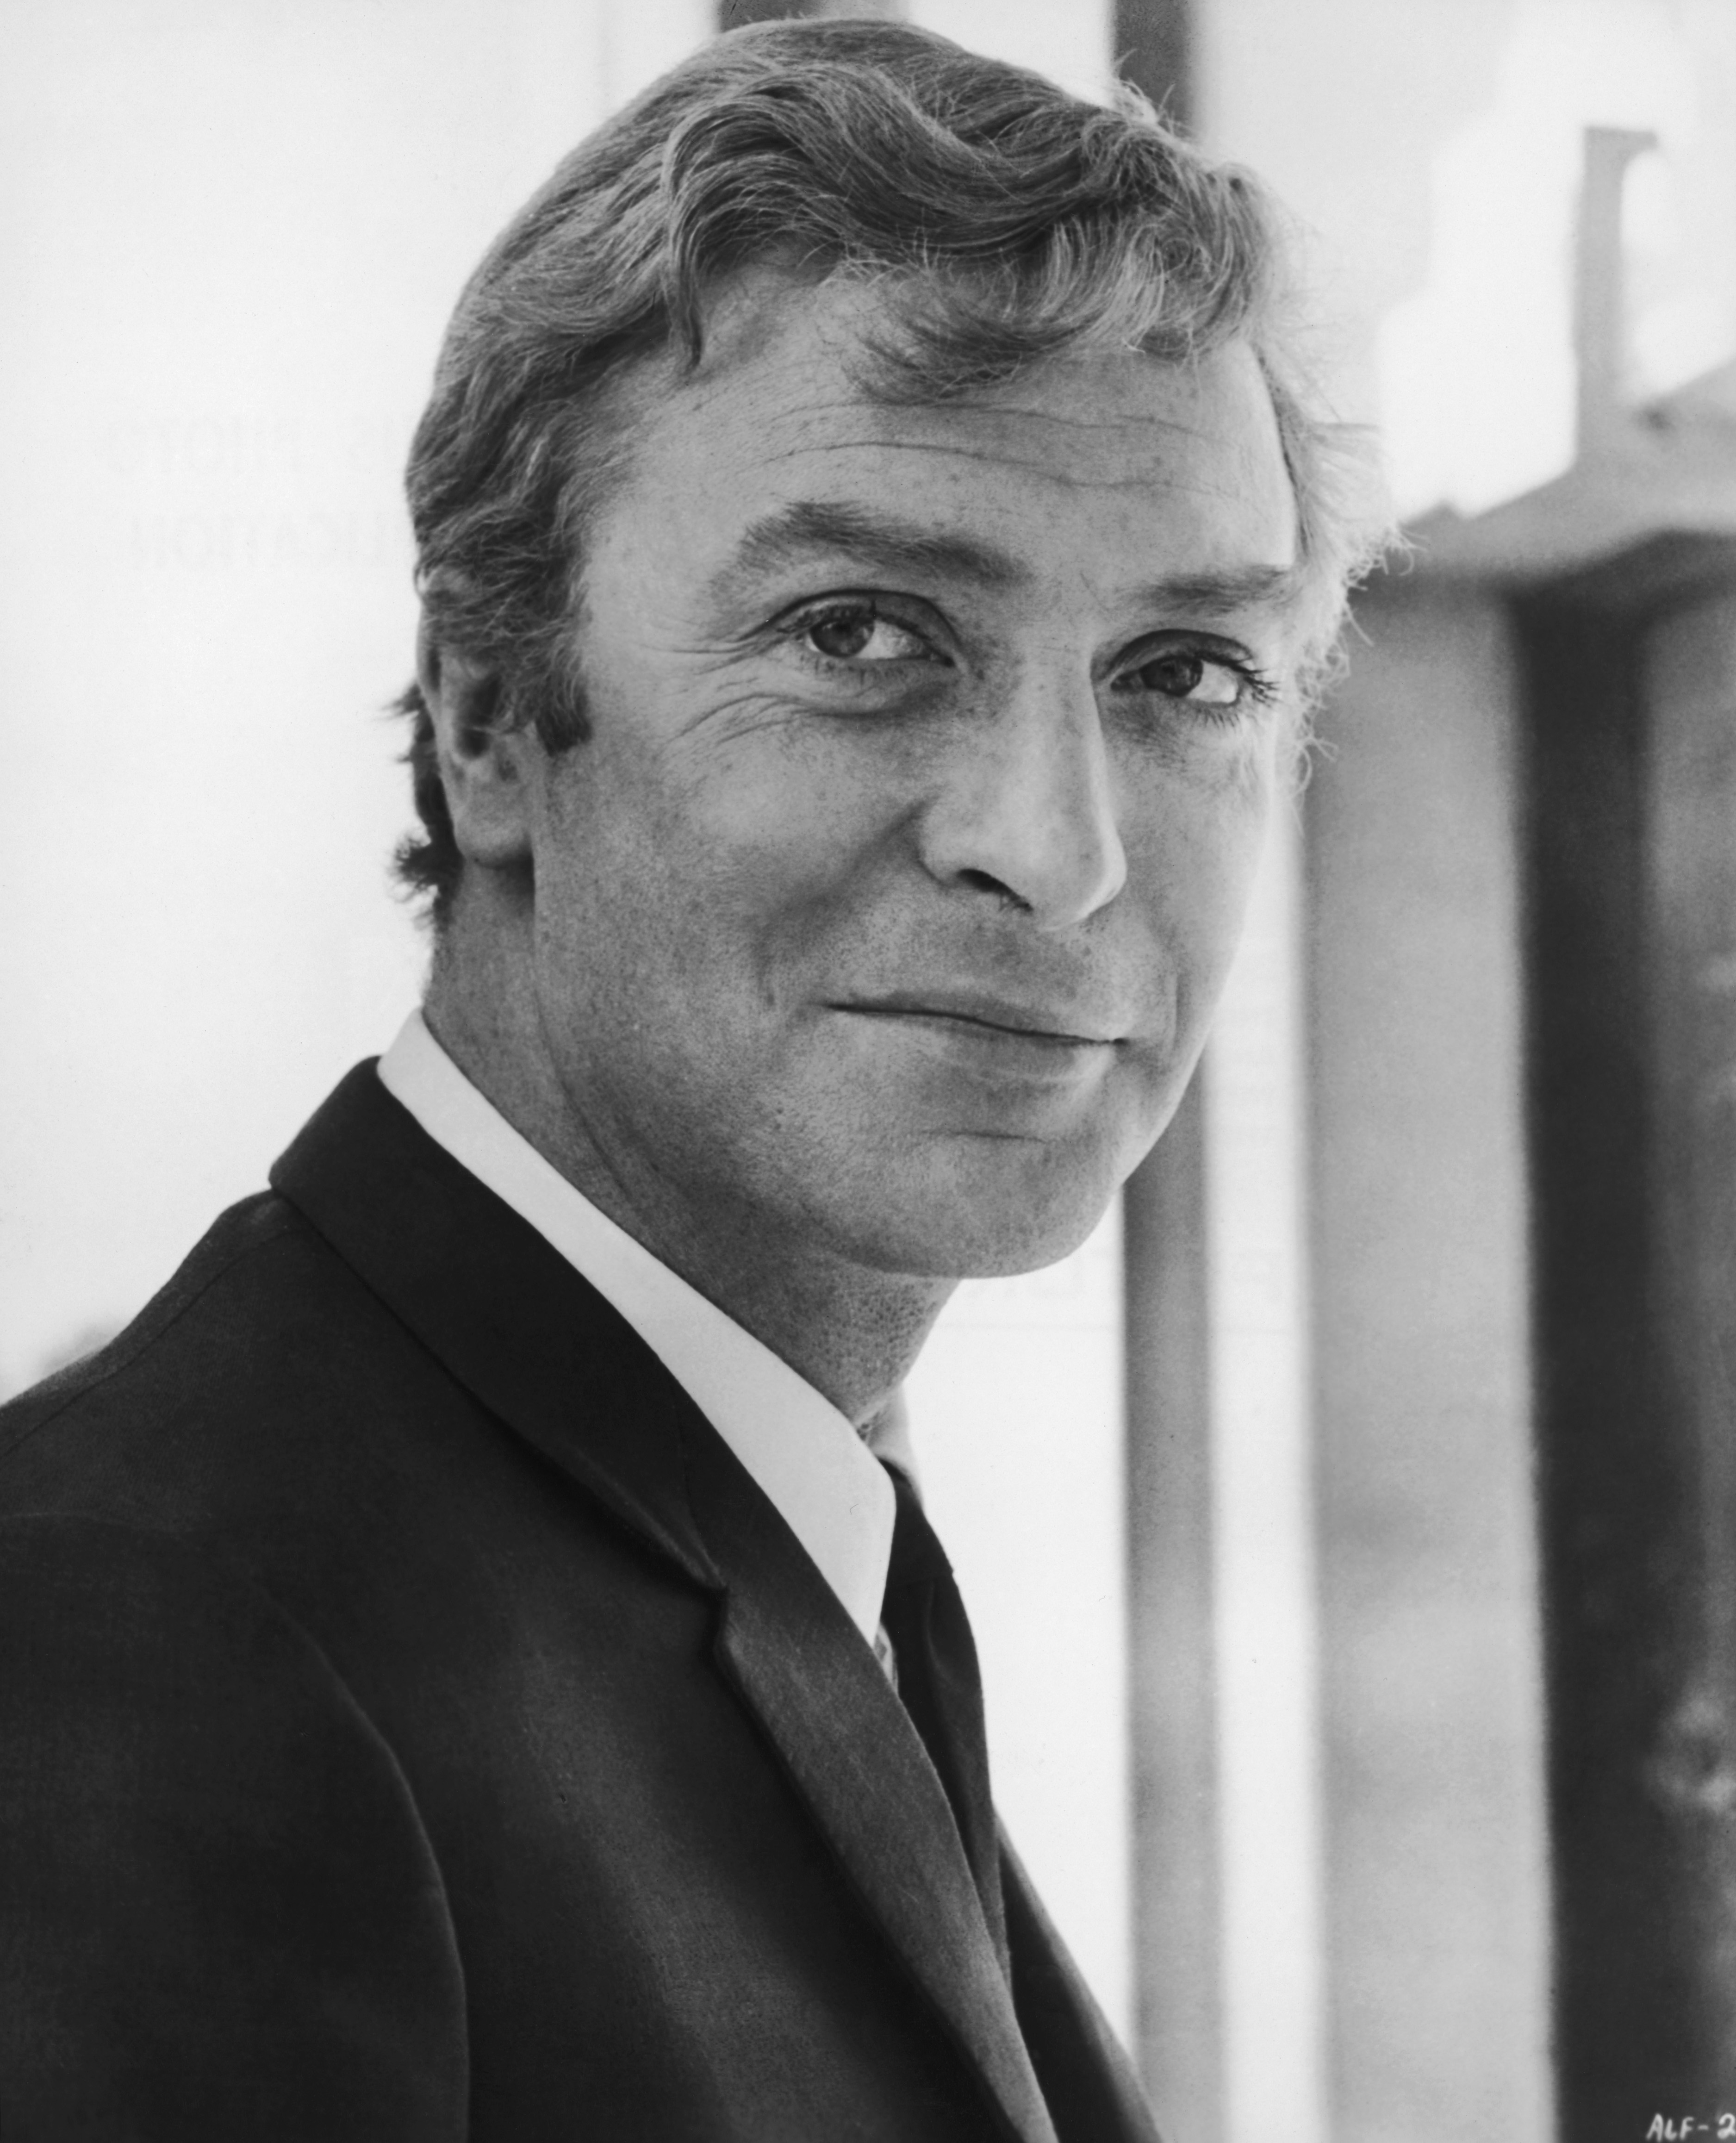 English actor Michael Caine starring in the film 'Alfie', circa 1966. | Source: Getty Images